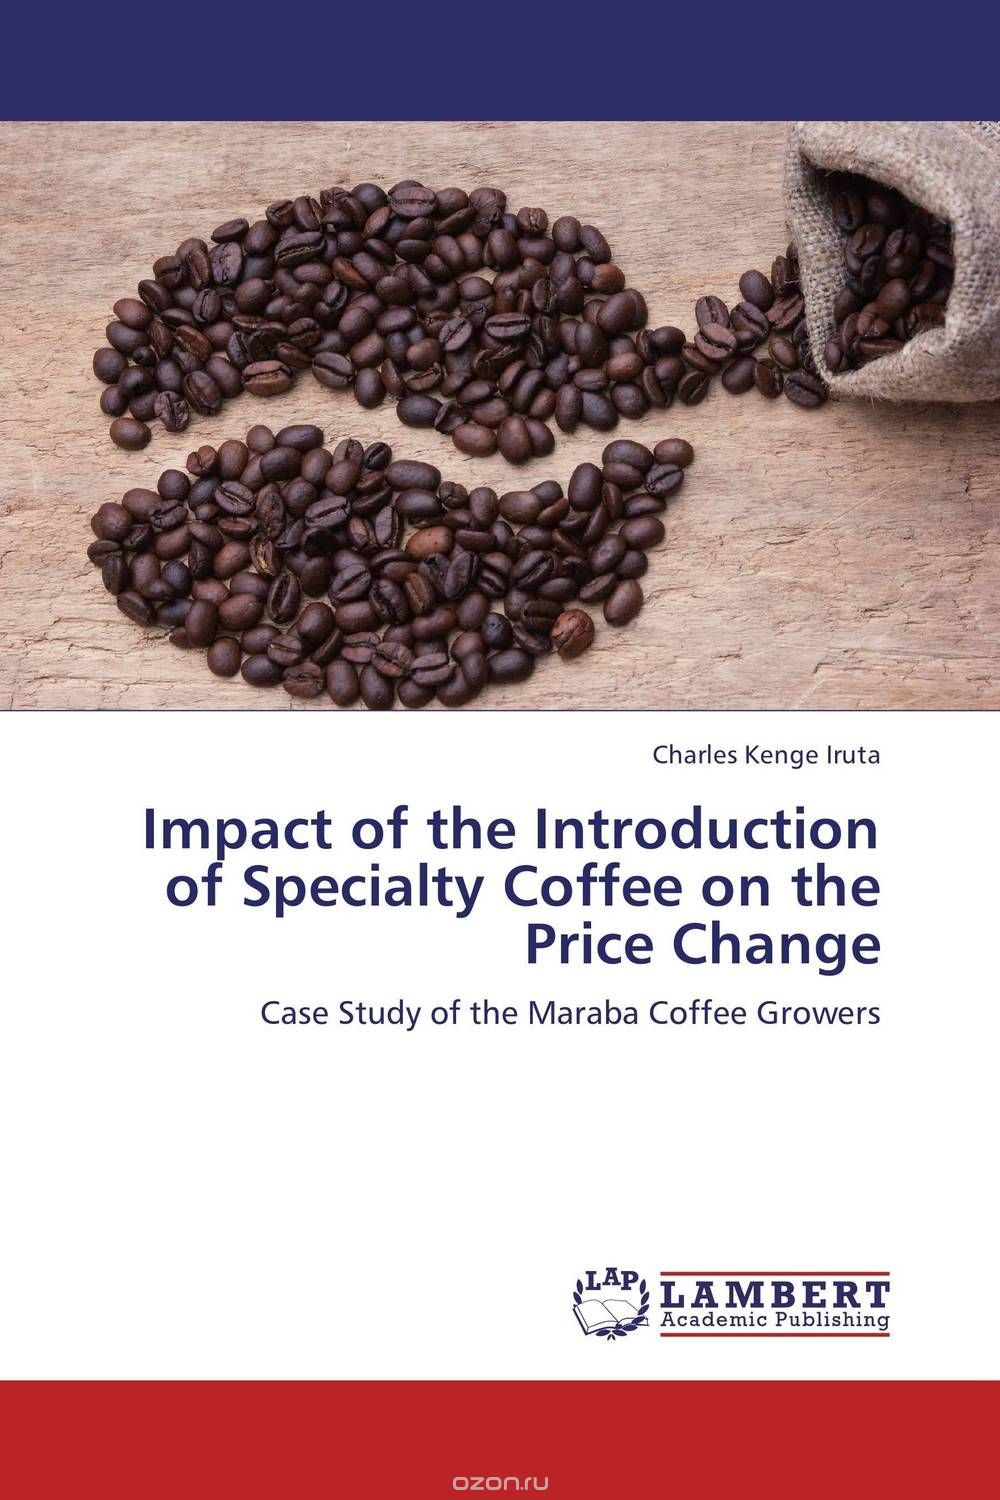 Скачать книгу "Impact of the Introduction of Specialty Coffee on the Price Change"